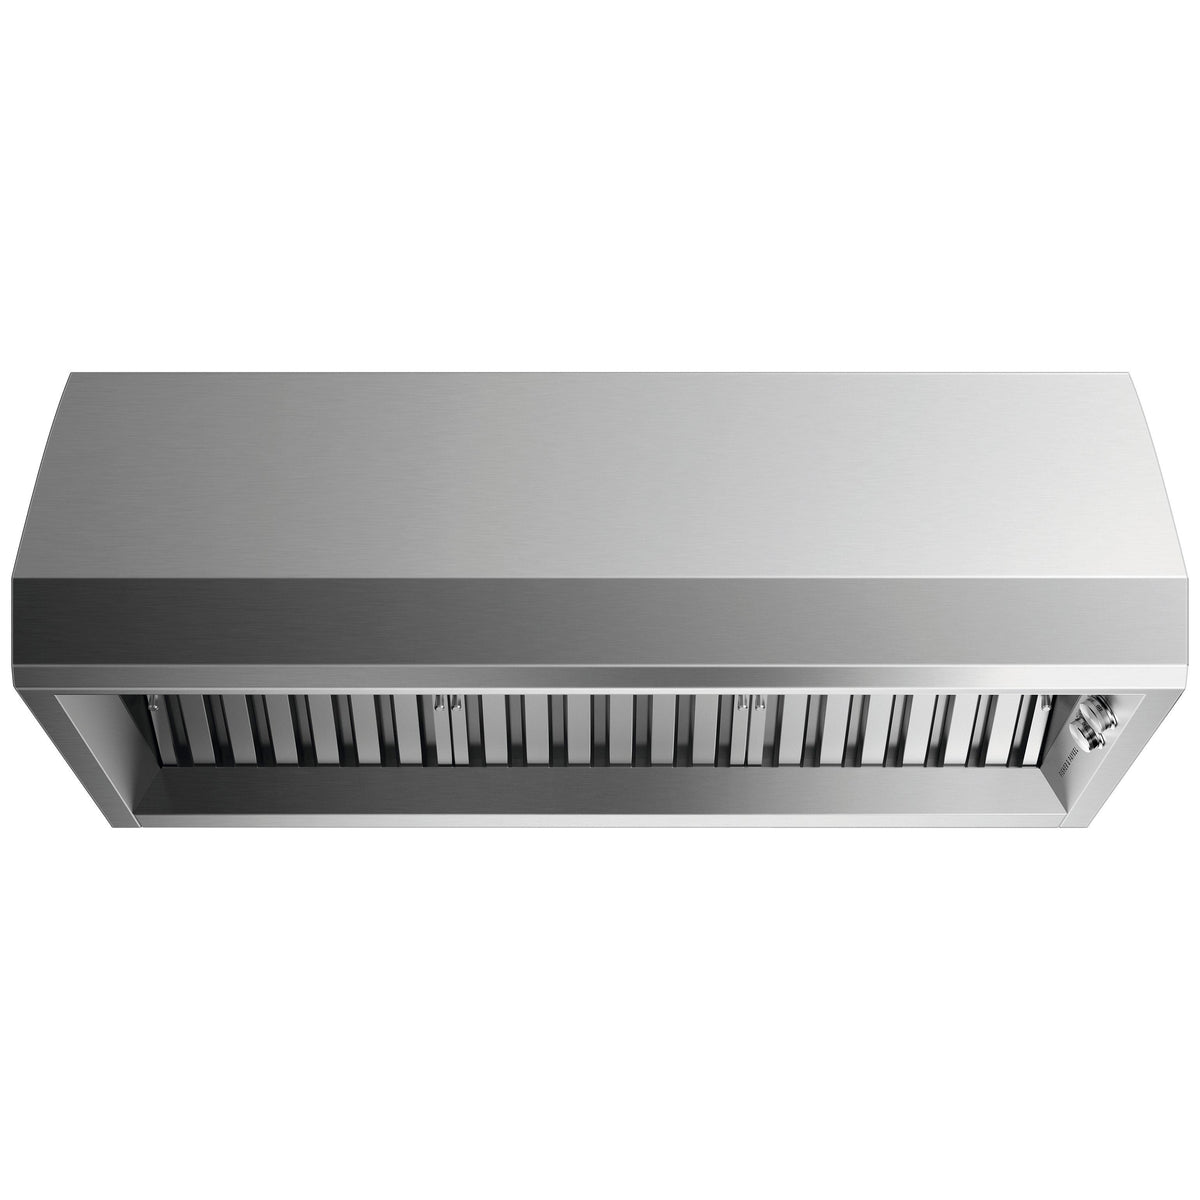 Fisher & Paykel 48-inch Series 9 Professional Wall Mount Range Hood HCB48-12 N IMAGE 1